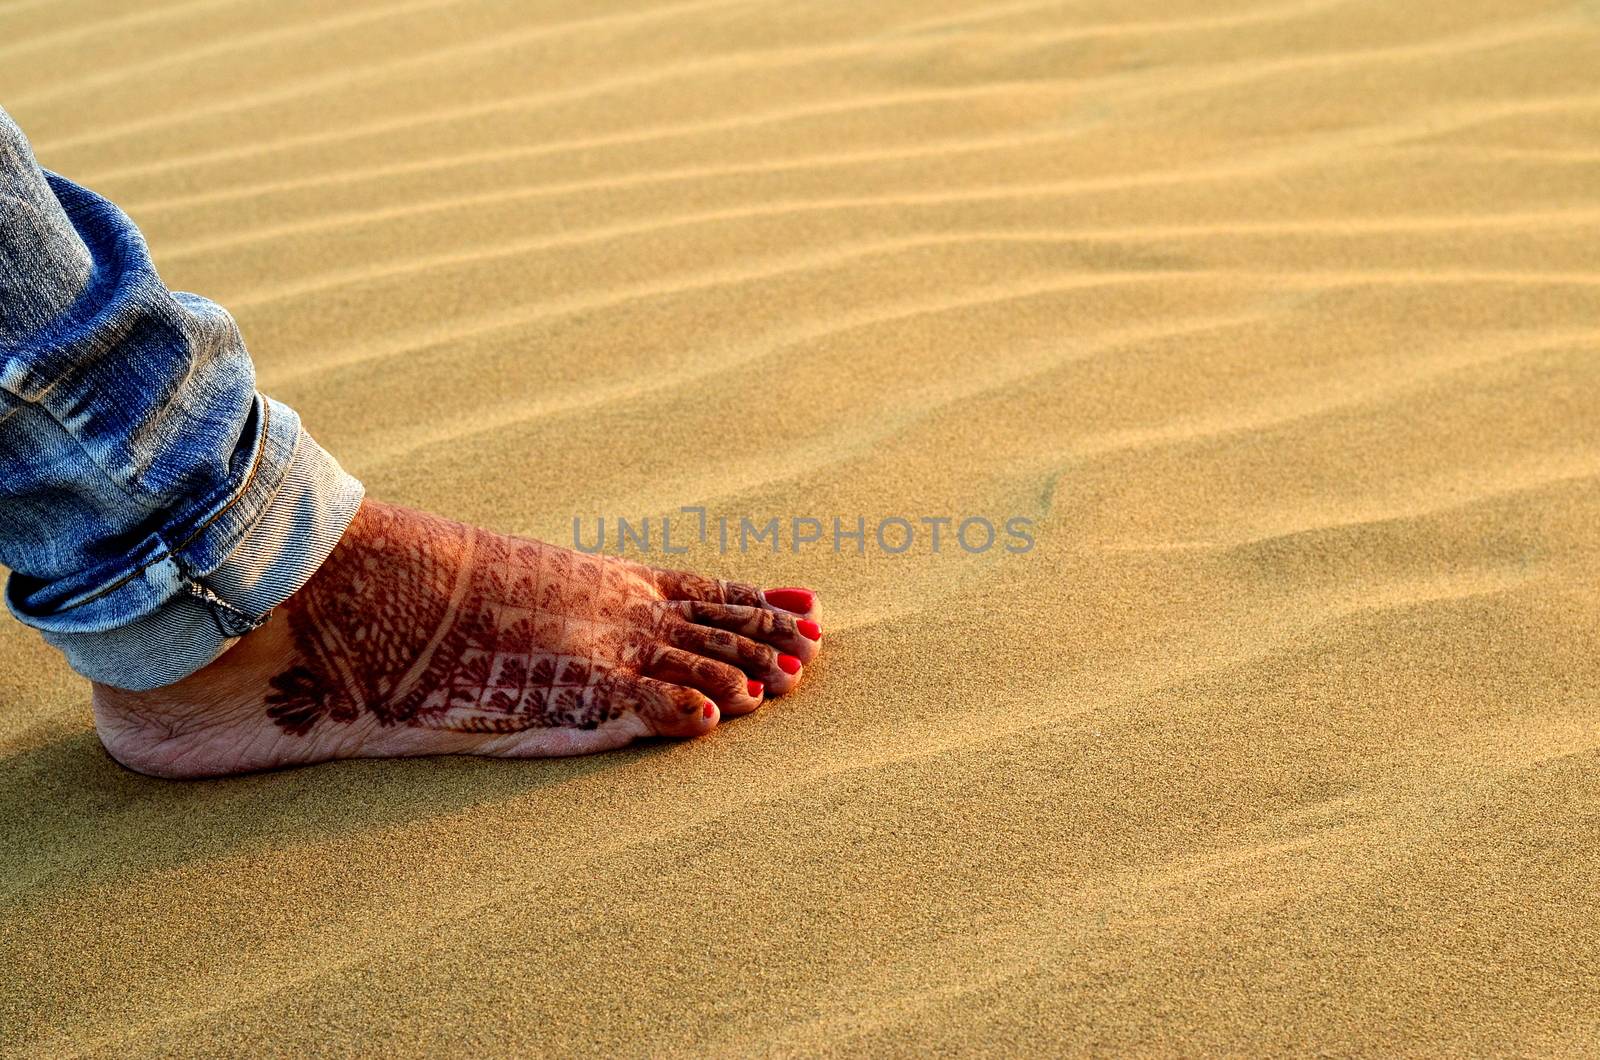 A newly married woman showing her foot with henna design in Sam Sand Dune, Thar desert, Jaisalmer, Rajasthan, India. Indian women apply henna on their feet and hands as a part of their wedding ritual by jayantbahel